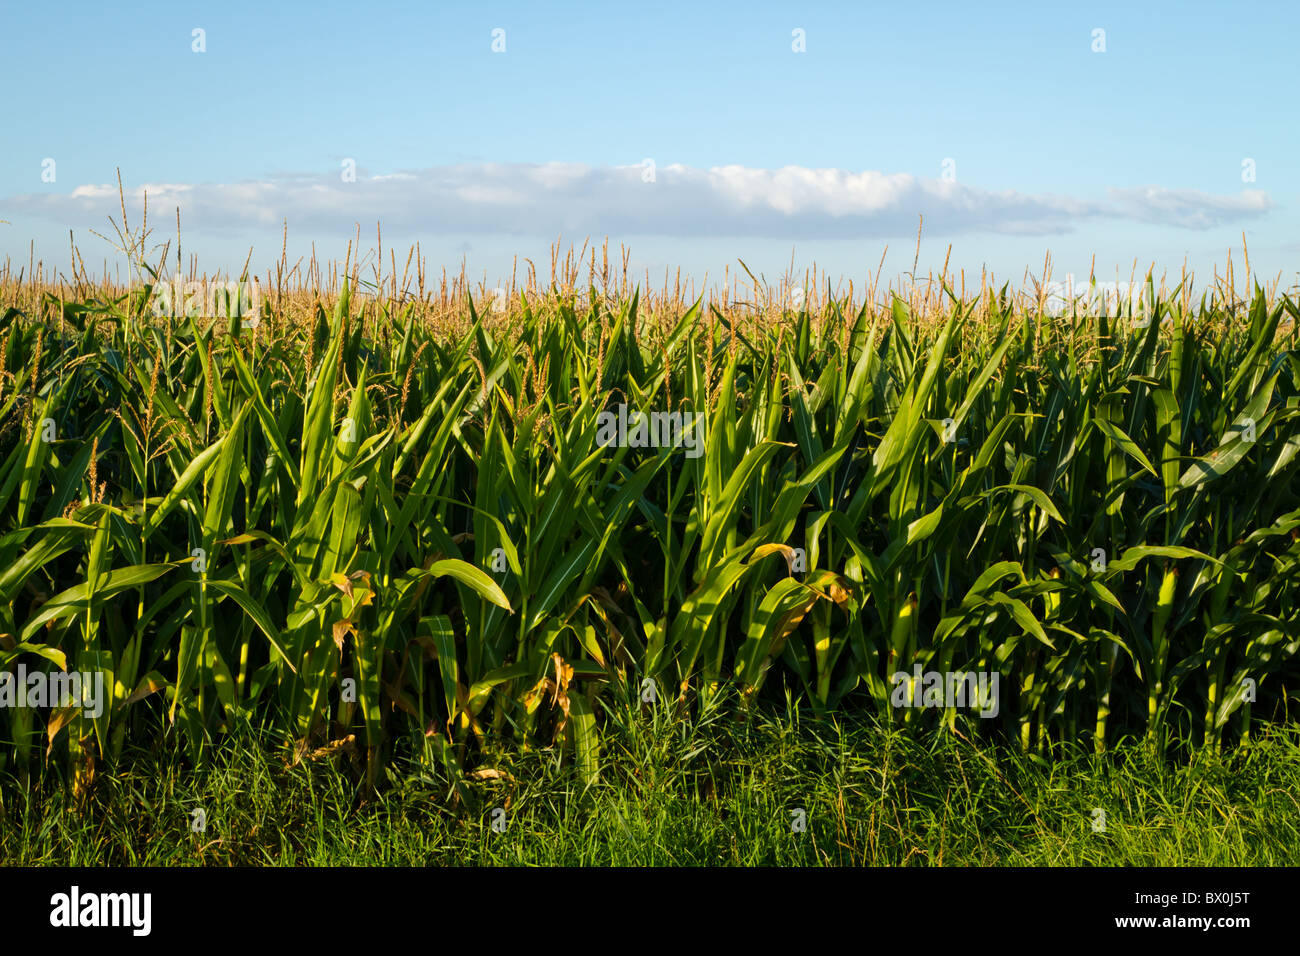 Corn field in the early morning a few weeks before harvest with a single cloud in the blue sky, England, UK Stock Photo